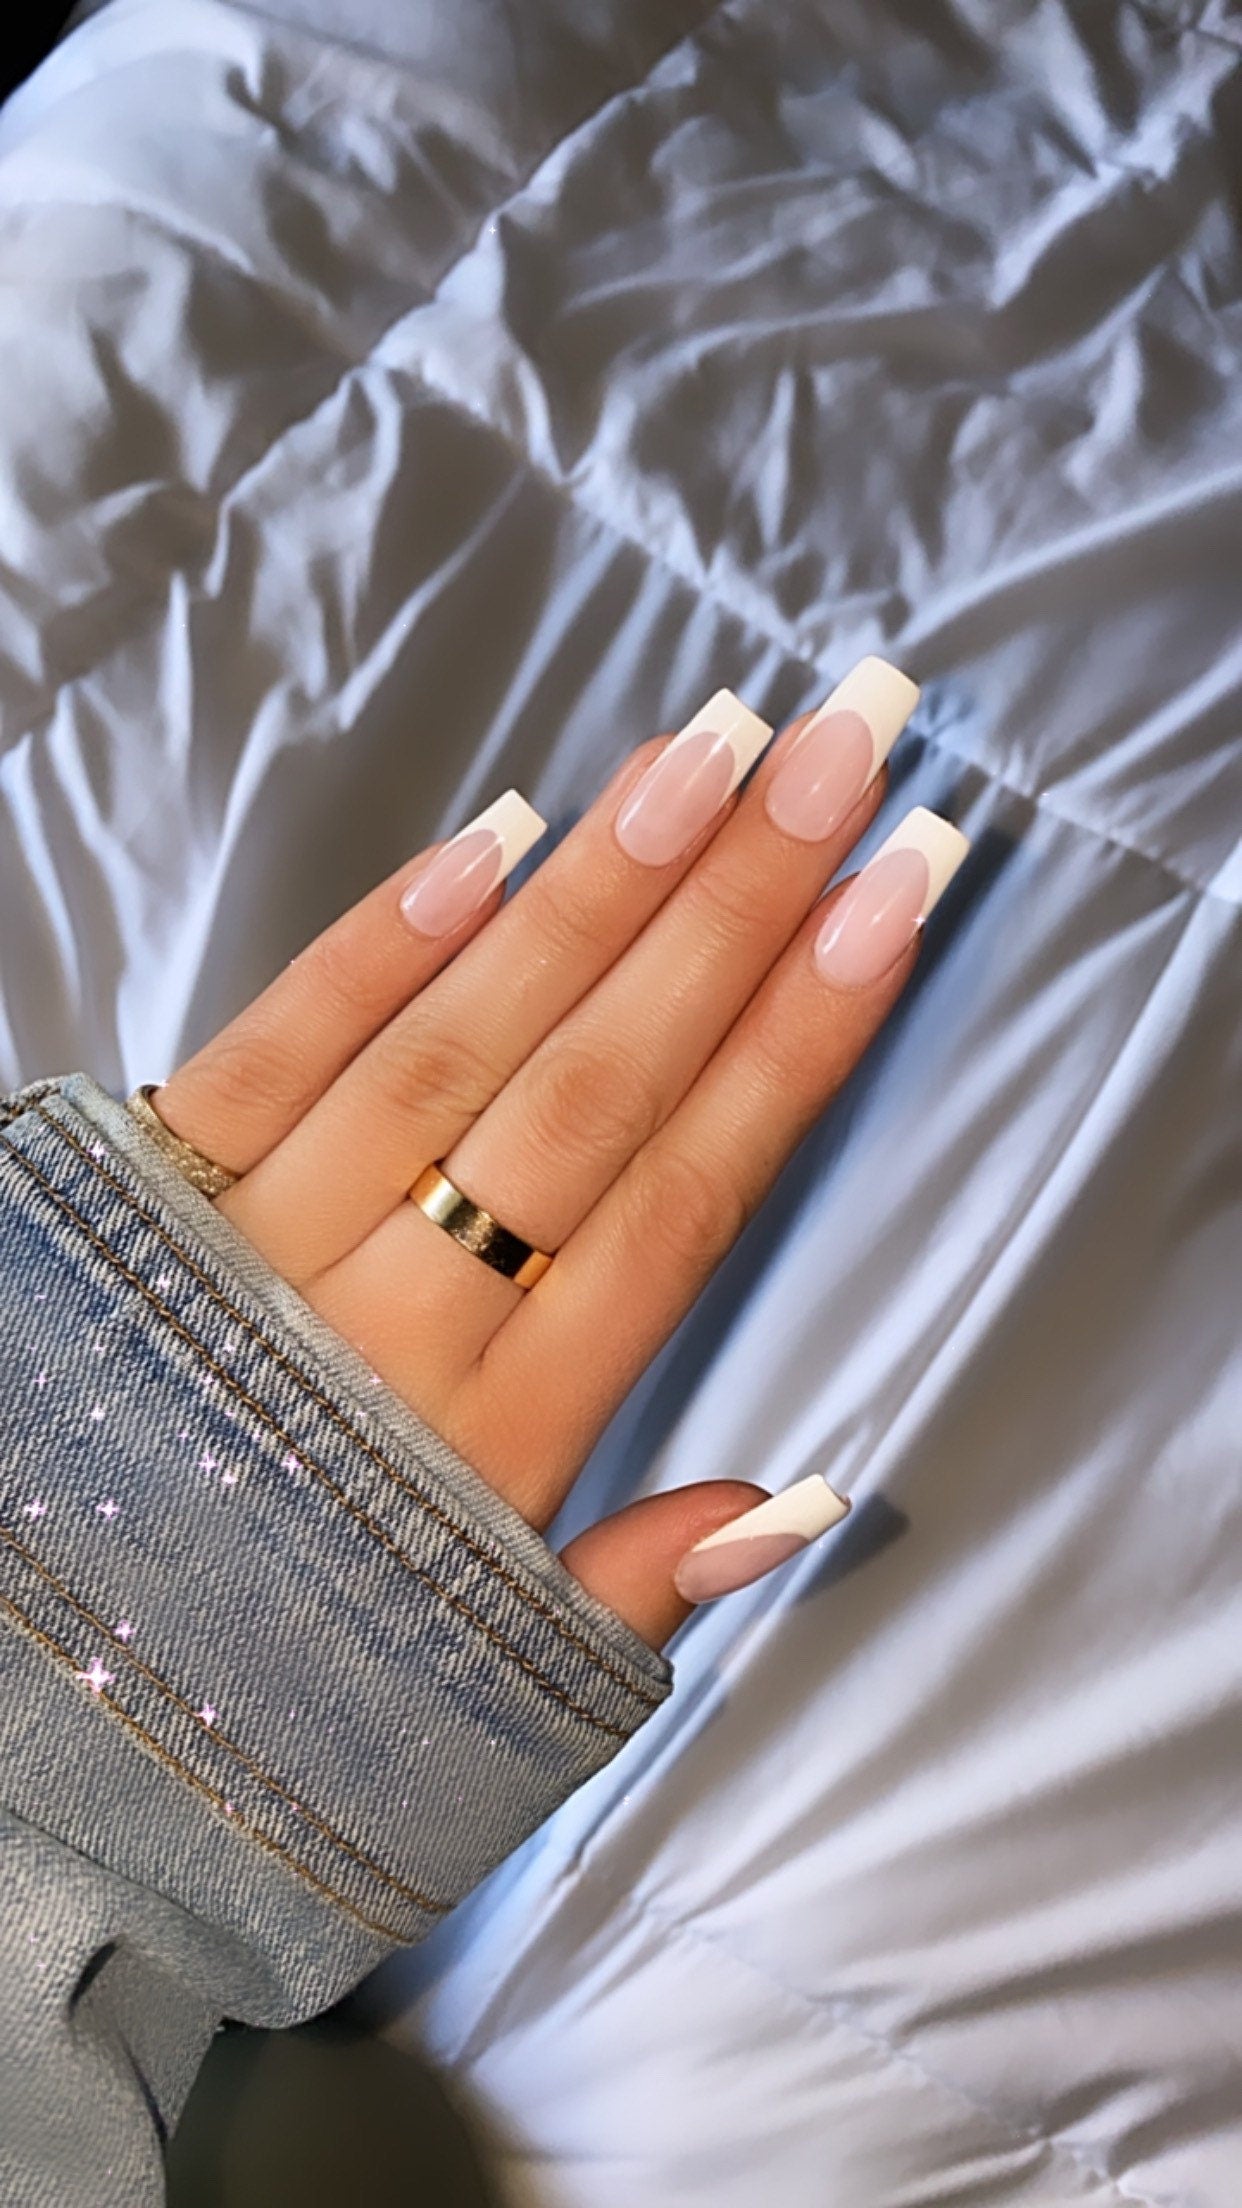 12 Chrome French Tip Nail Ideas for Bright, Shiny Manicures